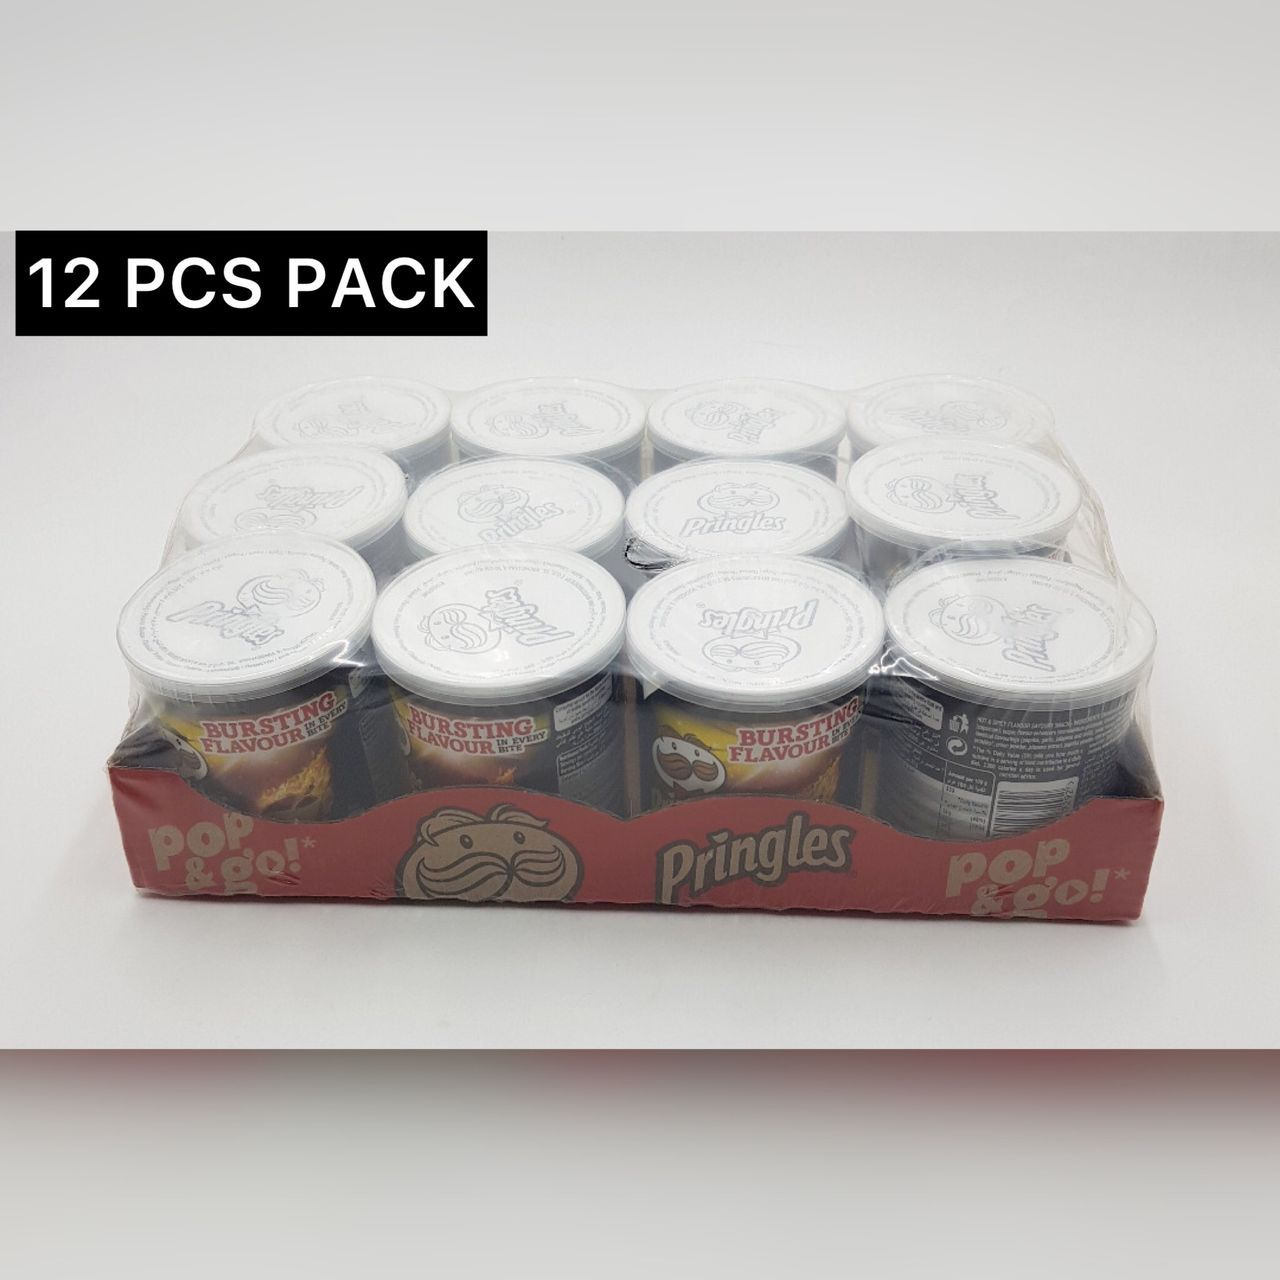 (Food) 12 Pcs Bundle Hot and Spicy Flavored Potato Chips BURSTING WITH FLAVOUR Snack (12X110g)